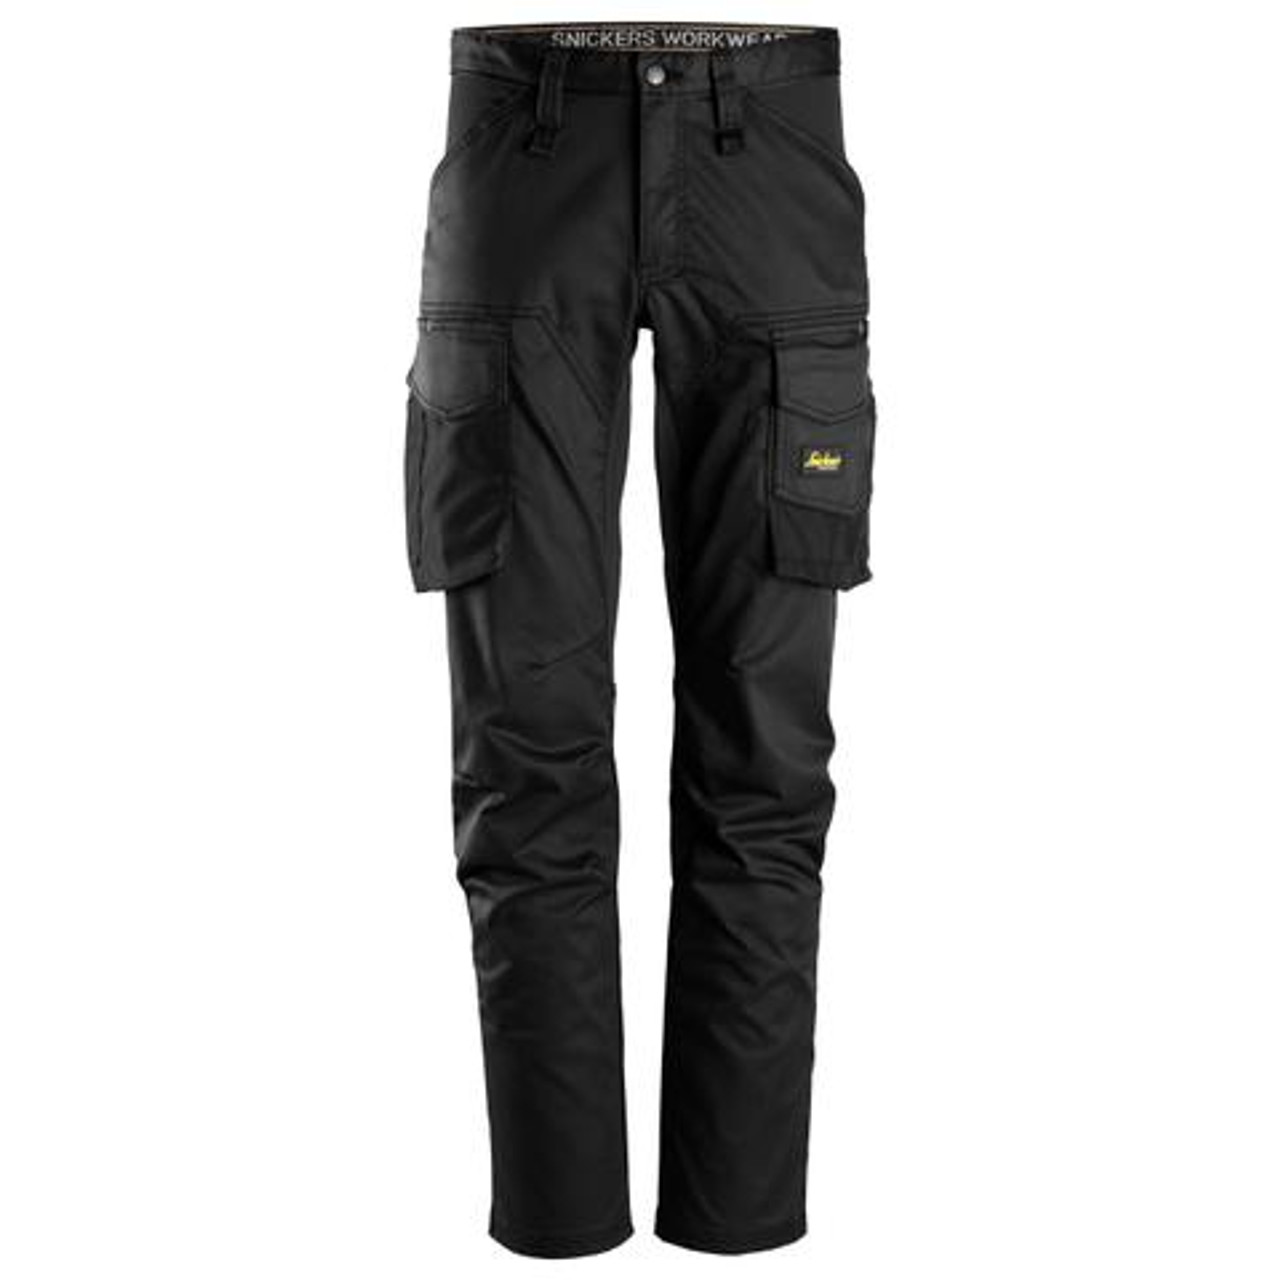 SNICKERS Cotton with Stretch Black Trousers for Electricians that have  available in Australia, New Zealand and Canada